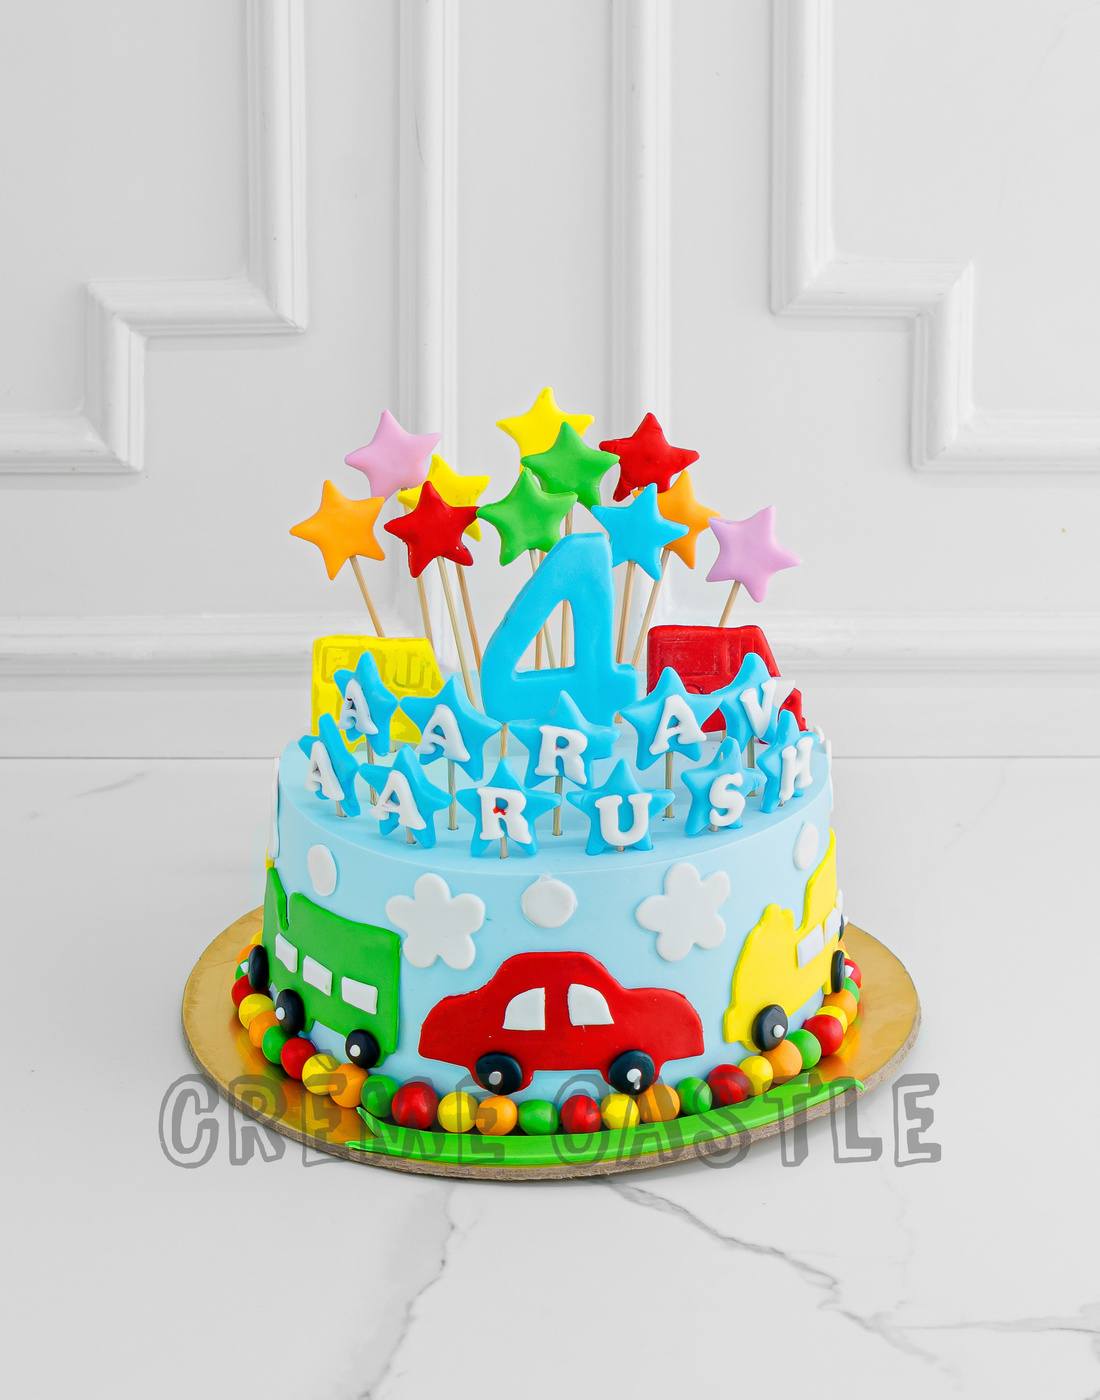 Photo of a cars road birthday cake - Patty's Cakes and Desserts